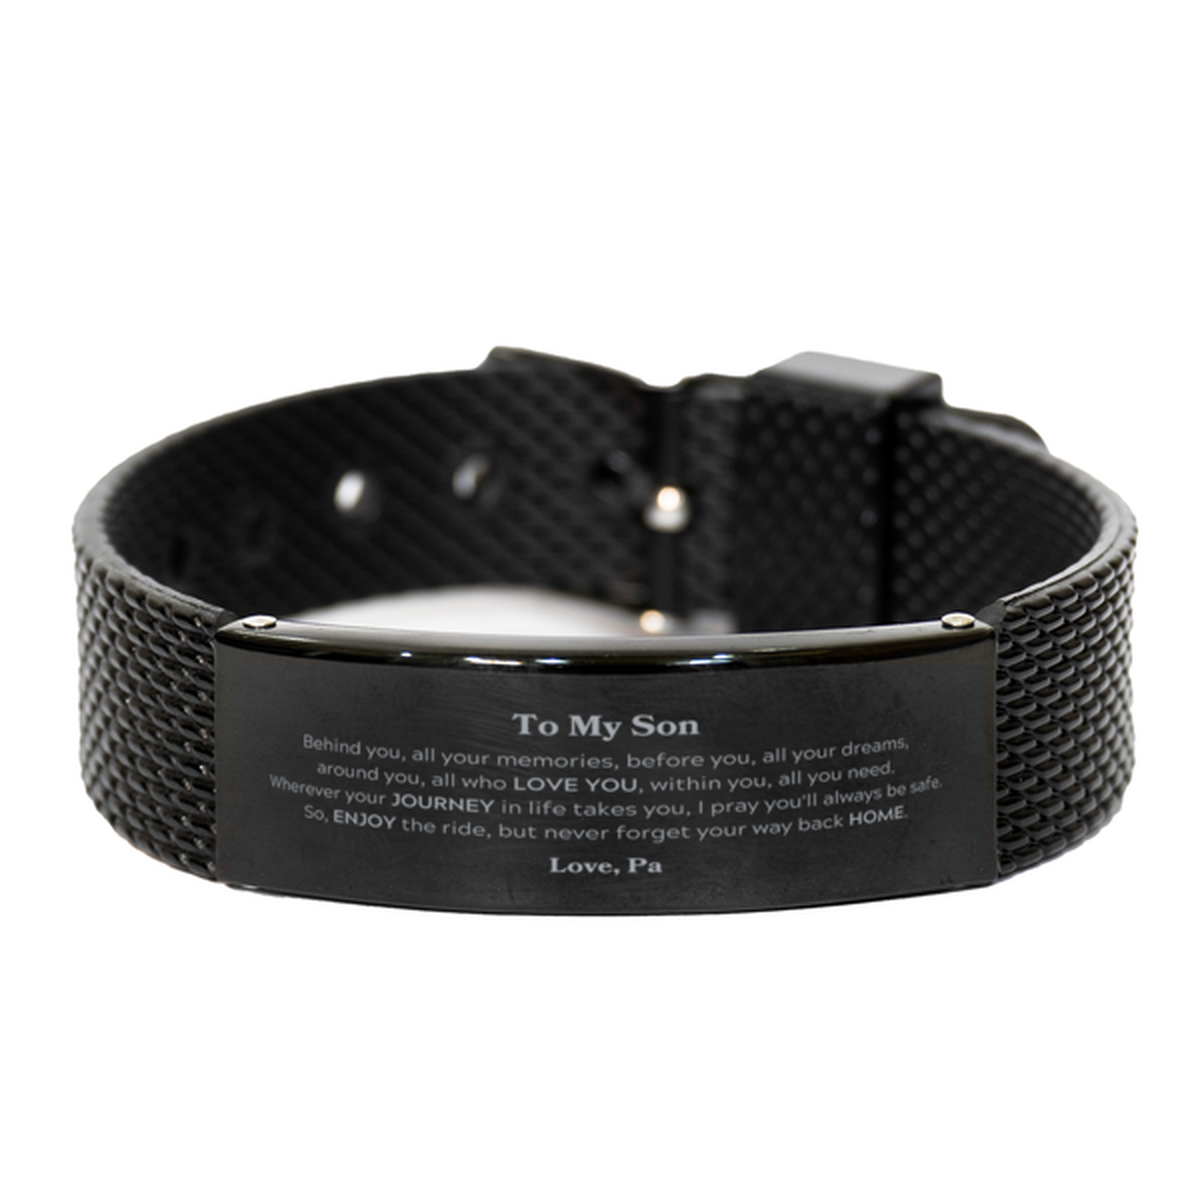 To My Son Graduation Gifts from Pa, Son Black Shark Mesh Bracelet Christmas Birthday Gifts for Son Behind you, all your memories, before you, all your dreams. Love, Pa